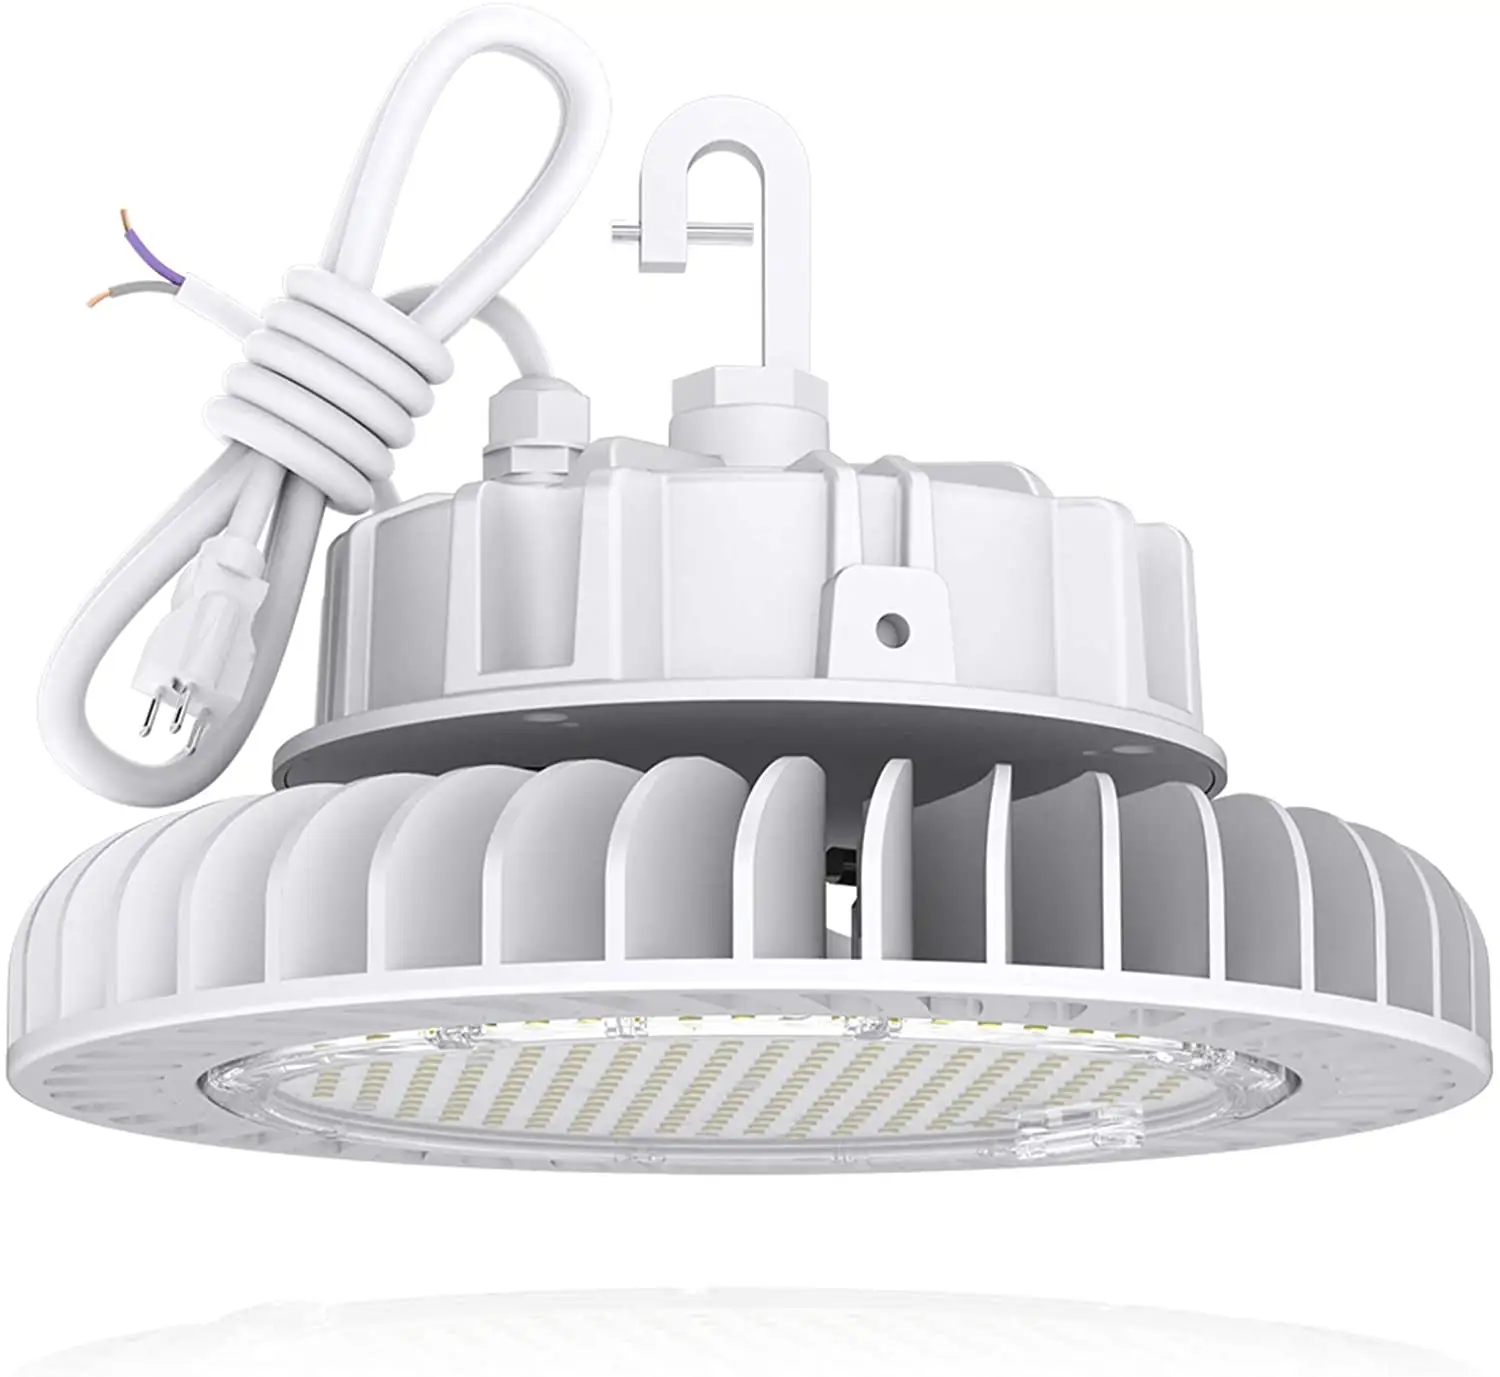 LED high level lighting 150W 20250lm 5000K dimmable 5 'cable with 110V plug hook safety rope factory gym Chandelier